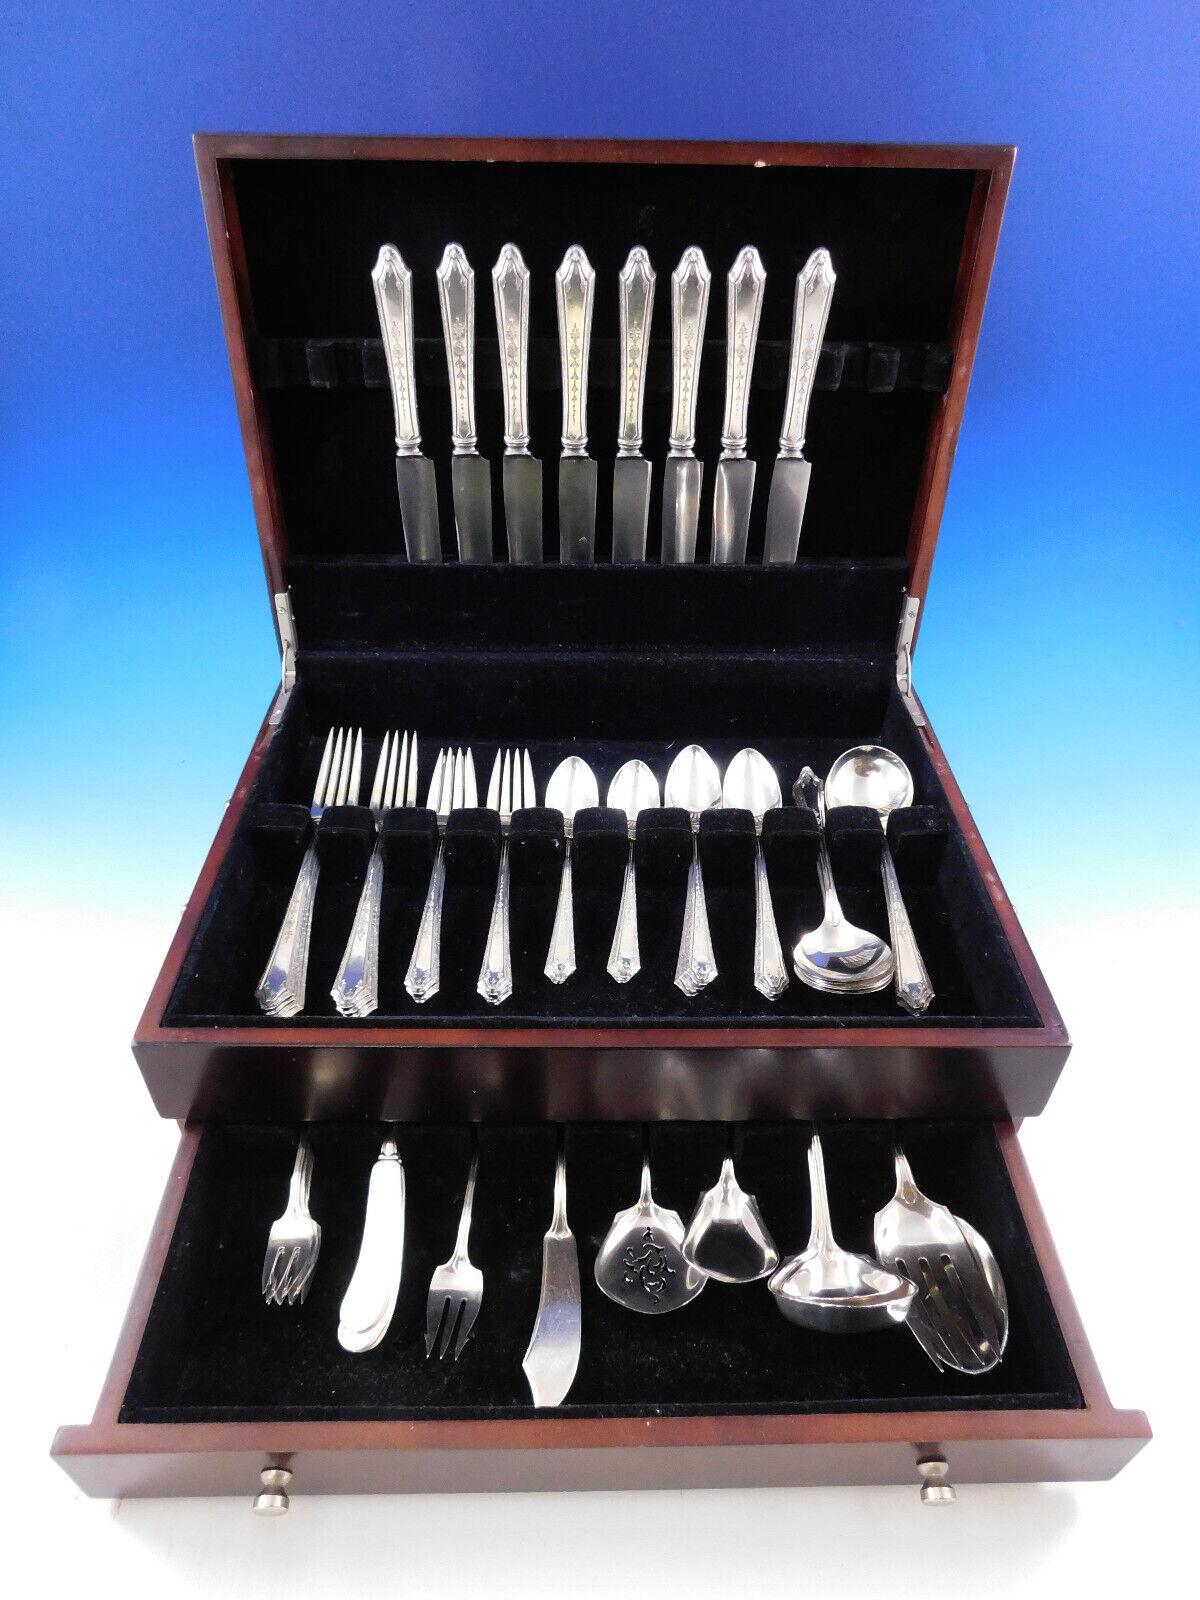 Virginia Lee by Towle, circa 1920, sterling silver Flatware set - 72 pieces. This scarce set includes:


8 Regular Knives, 8 3/4